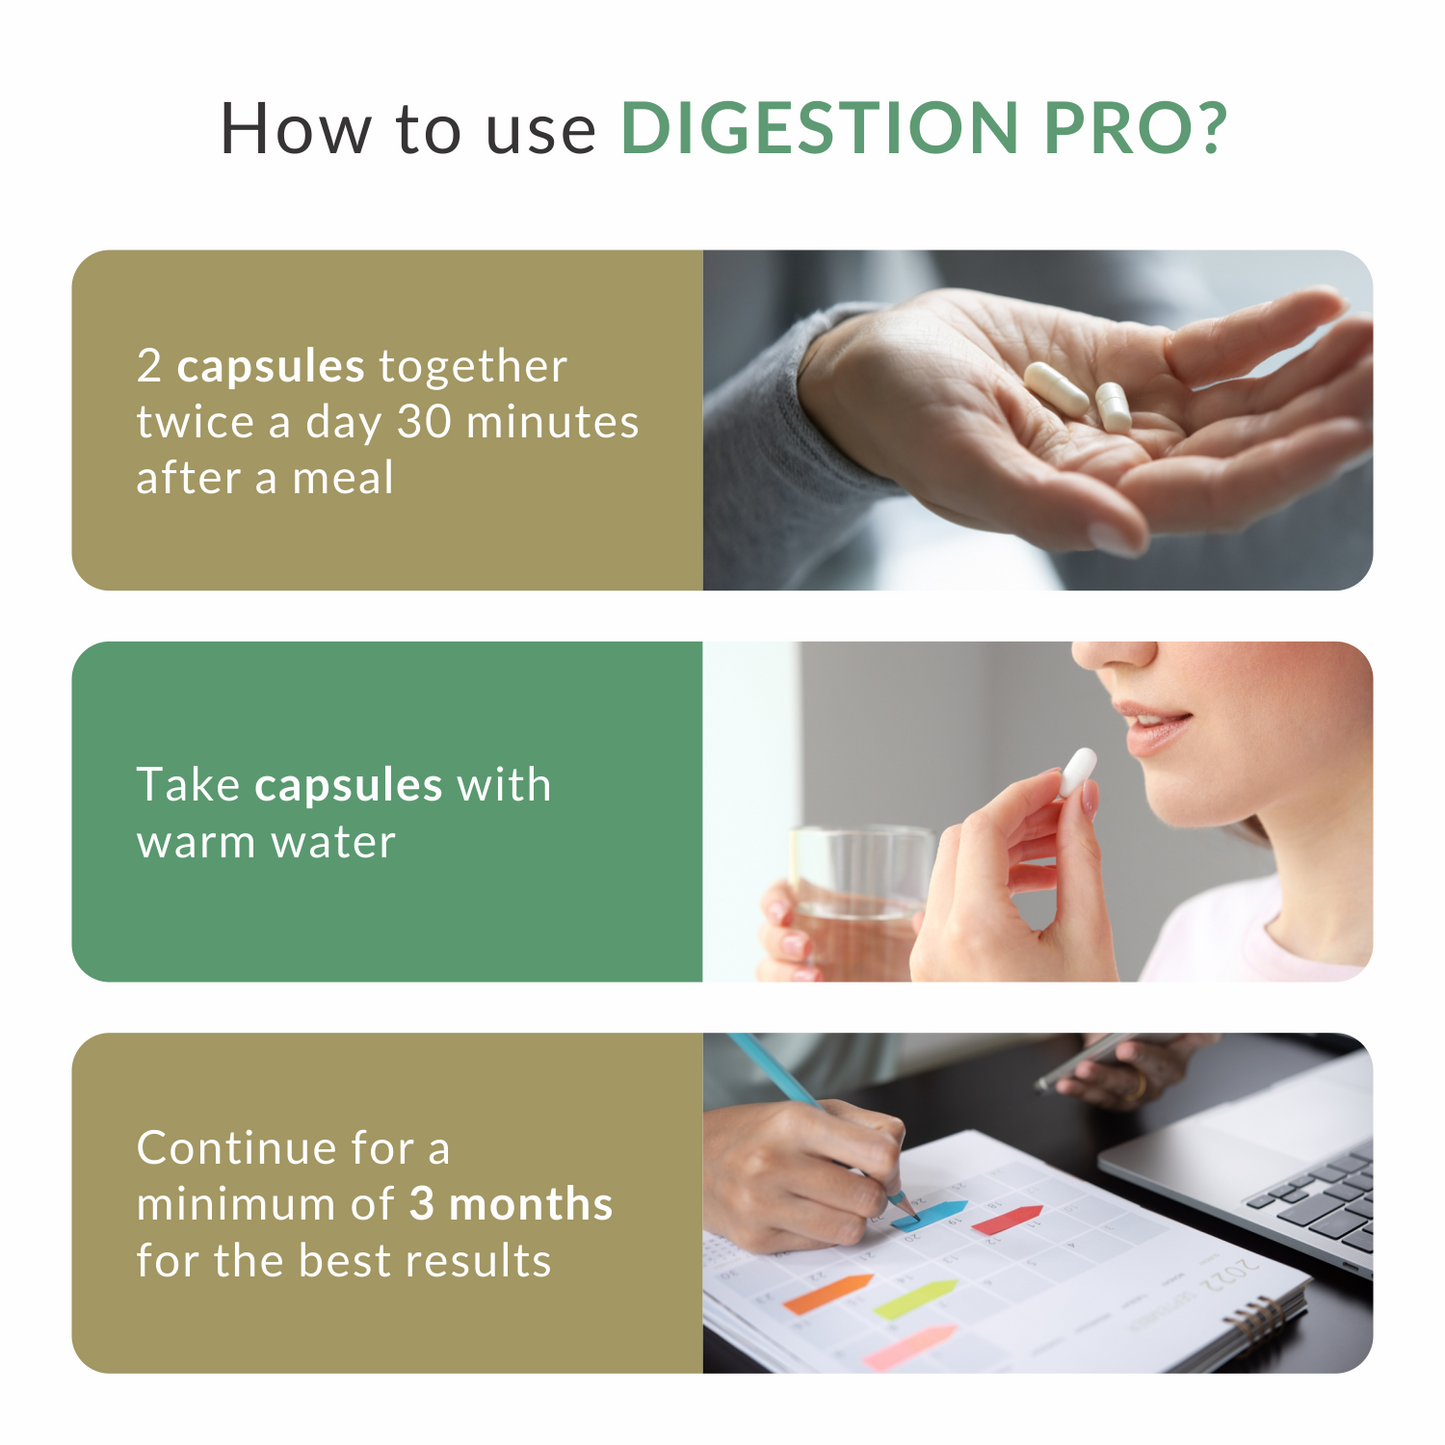 Digestion Pro Capsules: Helps with Acidity, Gas and Constipation